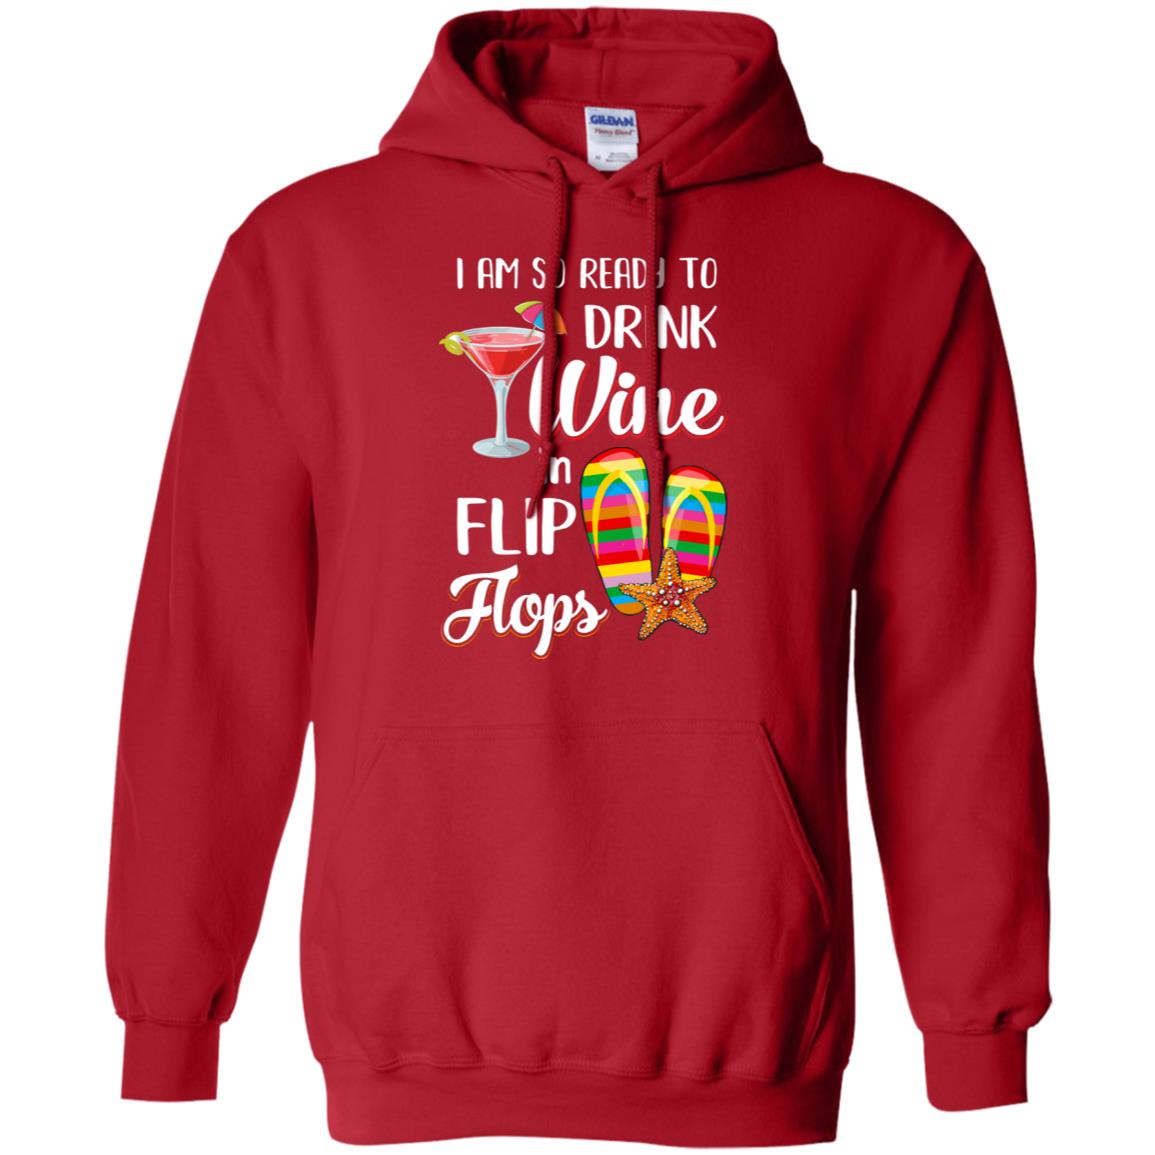 I Am So To Wine Drink & Tank Shirt Ready Top In Flops Beach Flip Funny